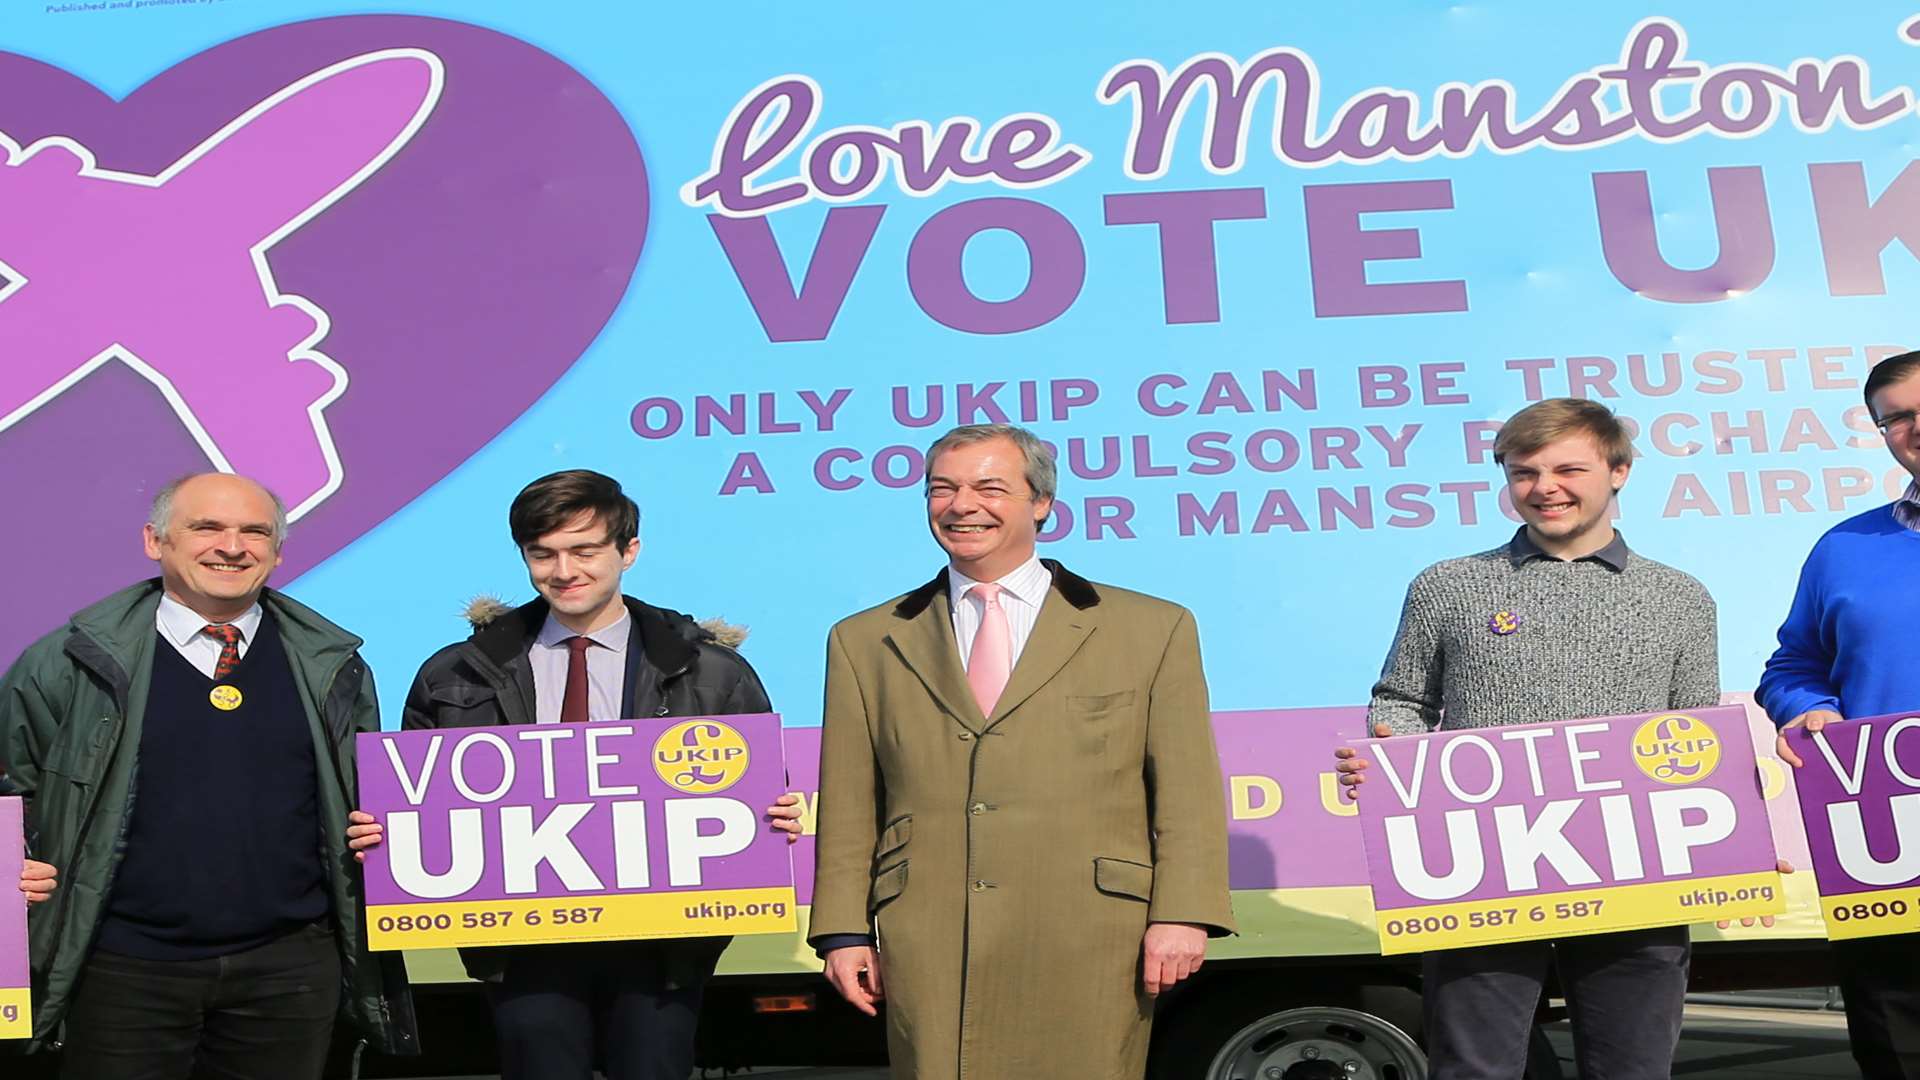 Nigel Farage and Ukip campaigners with the Save Manston poster truck.